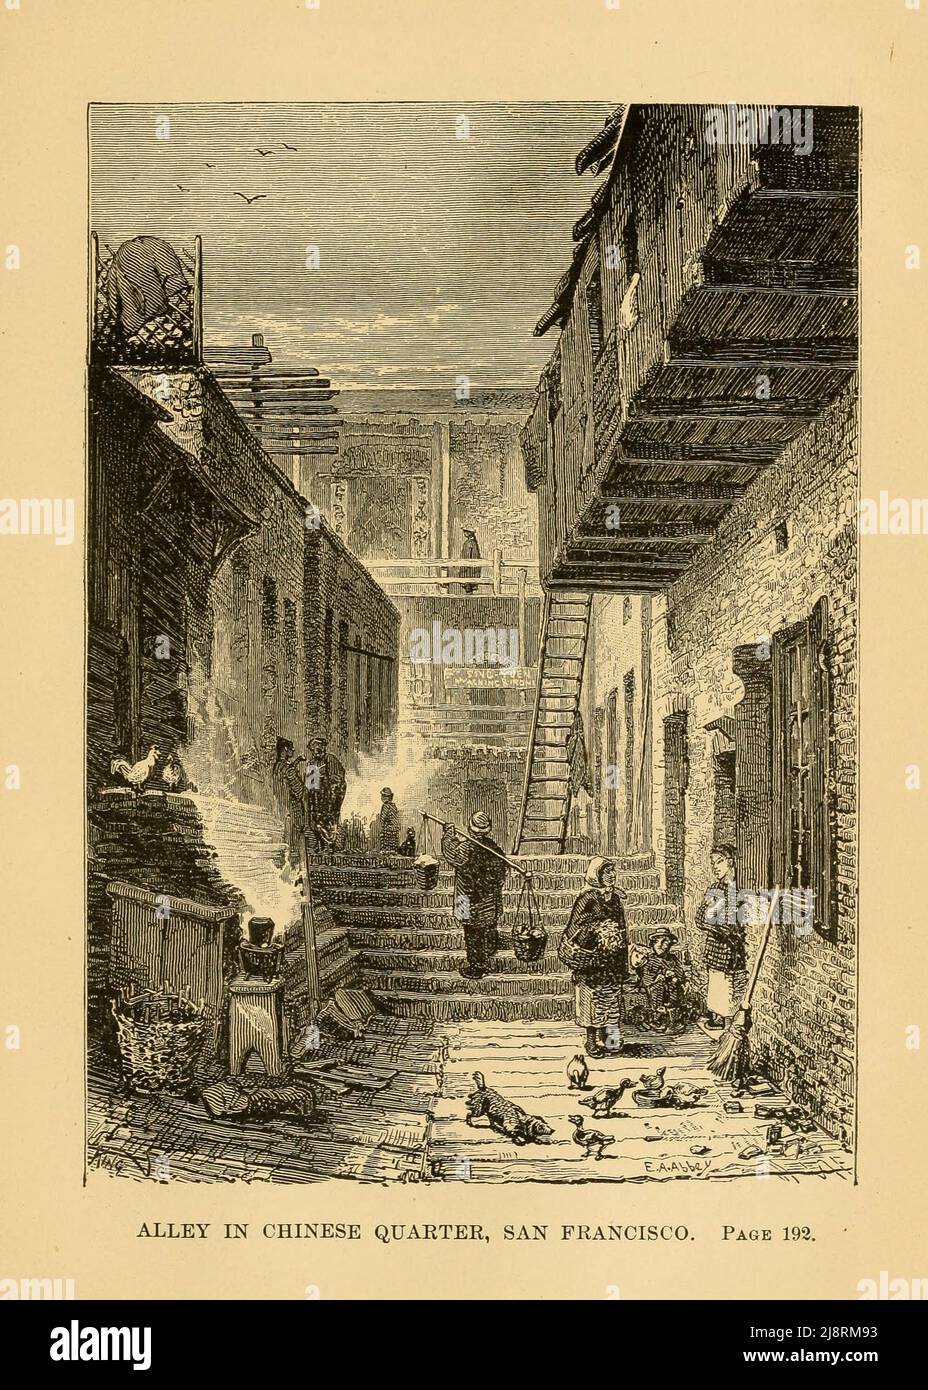 Alley in Chinese Quarter San Francisco from the book ' Two years in California ' by Mary Cone,  Publisher Chicago, S.C. Griggs and company 1876 A resident of Marietta, Ohio, Mary Cone spent two years in California in the 1870s. Two years in California (1876) is more a guide than a first-person narrative of her experiences in the West. She treats the state's history, climate, agriculture, and geography before turning to its regions: Southern California (San Diego, Los Angeles, Santa Barbara), the Sacramento and San Joaqun Valleys (with chapters on individual Sacramento ranches), Northern Califo Stock Photo